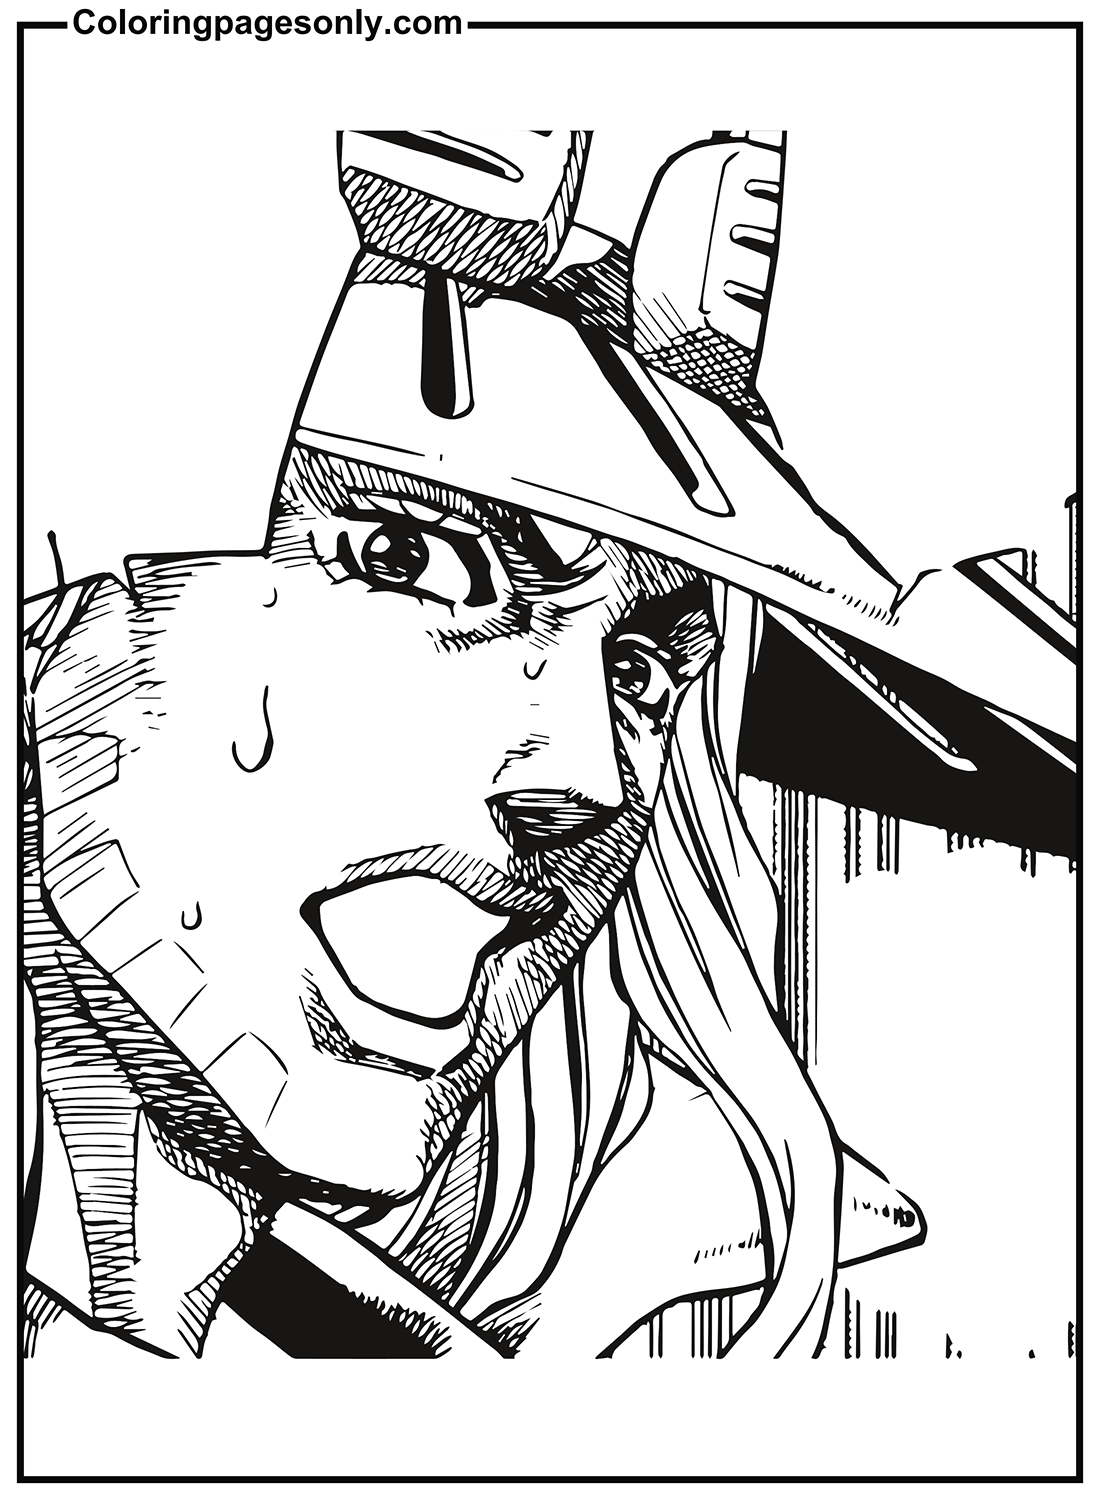 Character From JoJo's Bizarre Adventure Coloring Pages